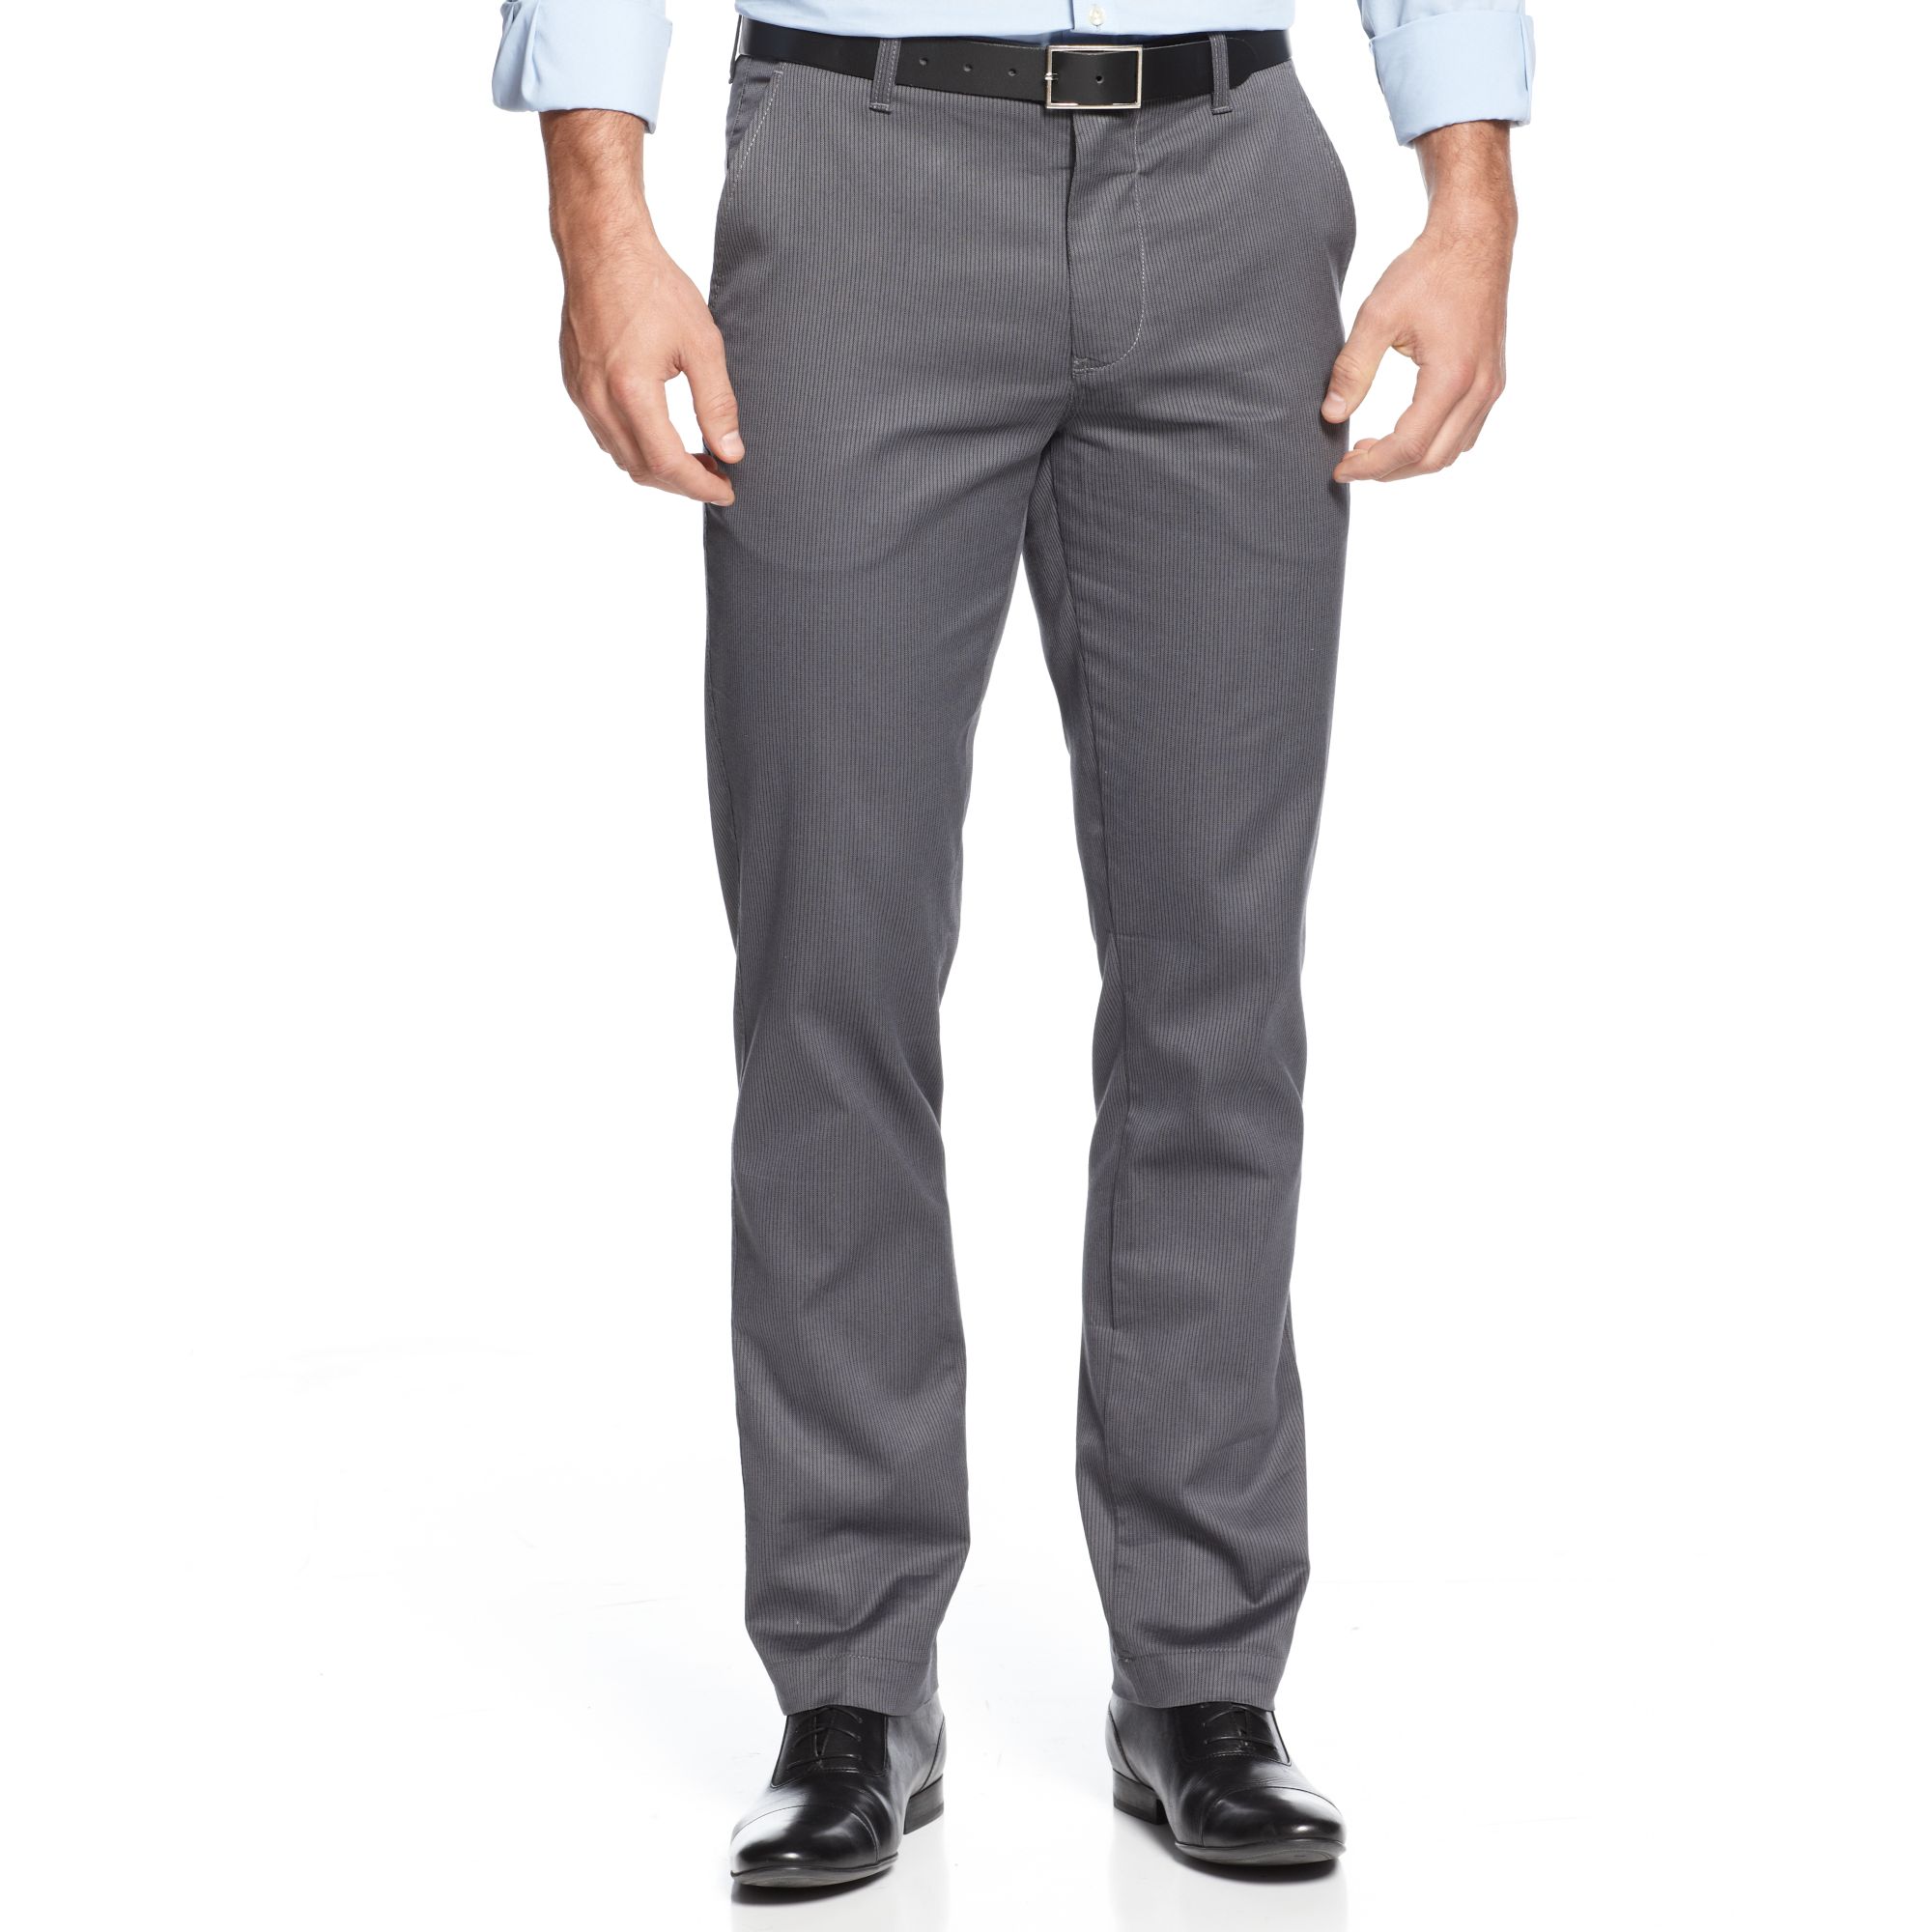 Dkny Slim-fit Flat Front Twill Pinstripe Pants in Gray for Men (Grey ...